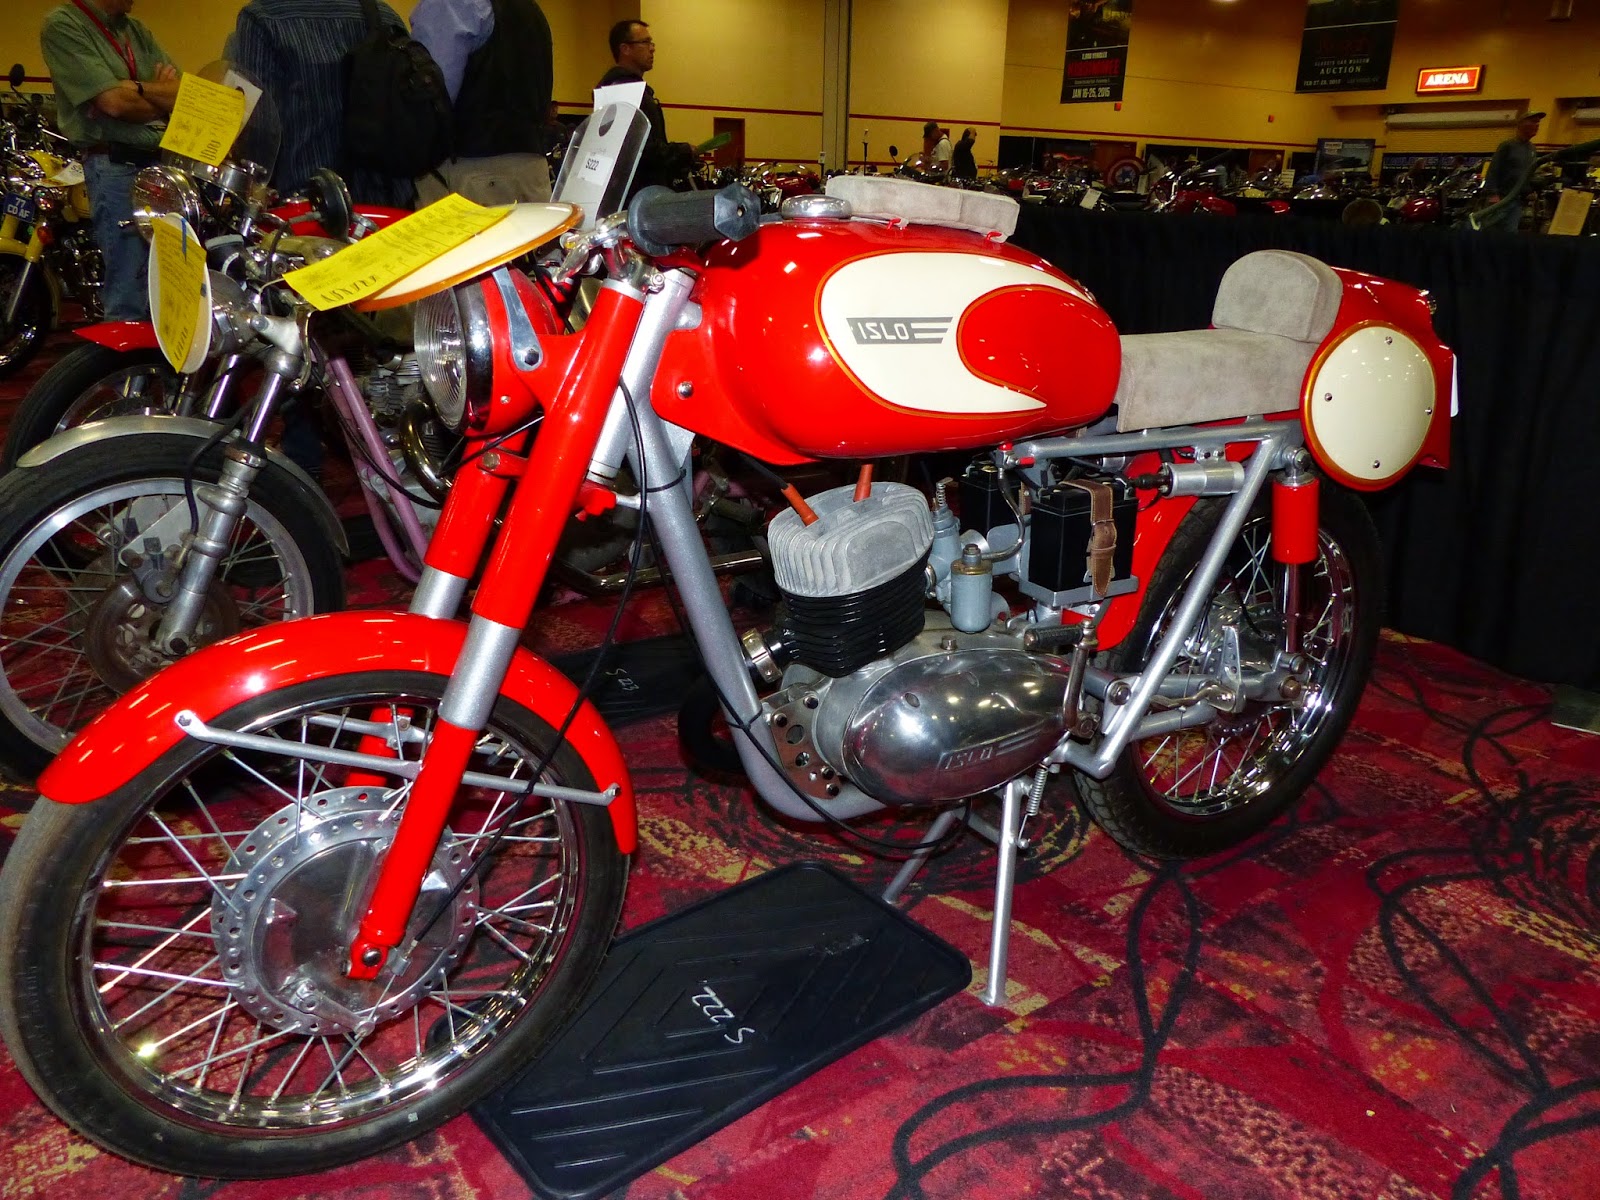 OldMotoDude: 1957 Islo 175 sold for $10,000 at the 2015 Las Vegas